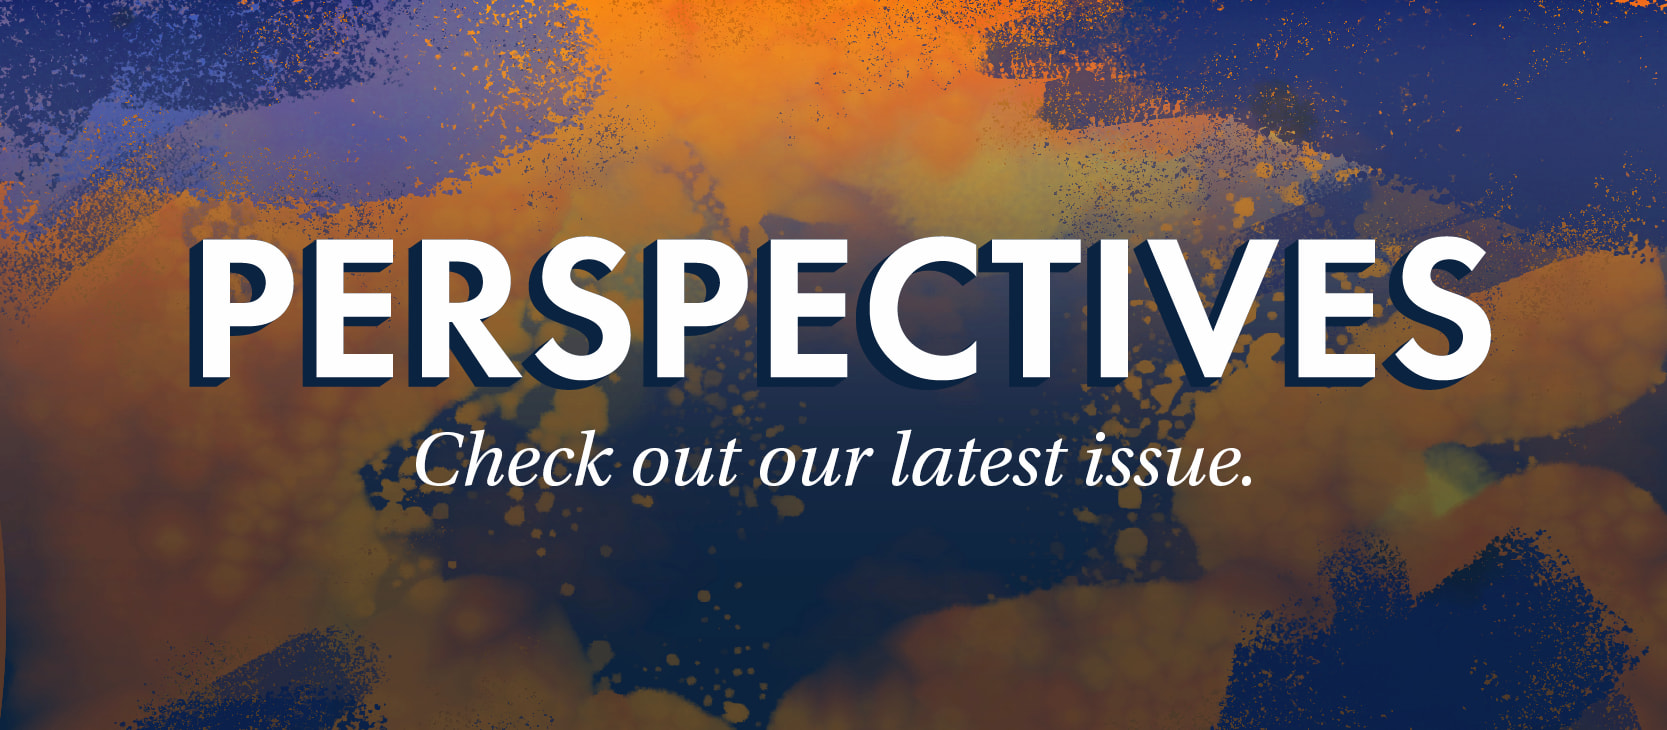 Perspecitves is now digital! Check out our latest issue.